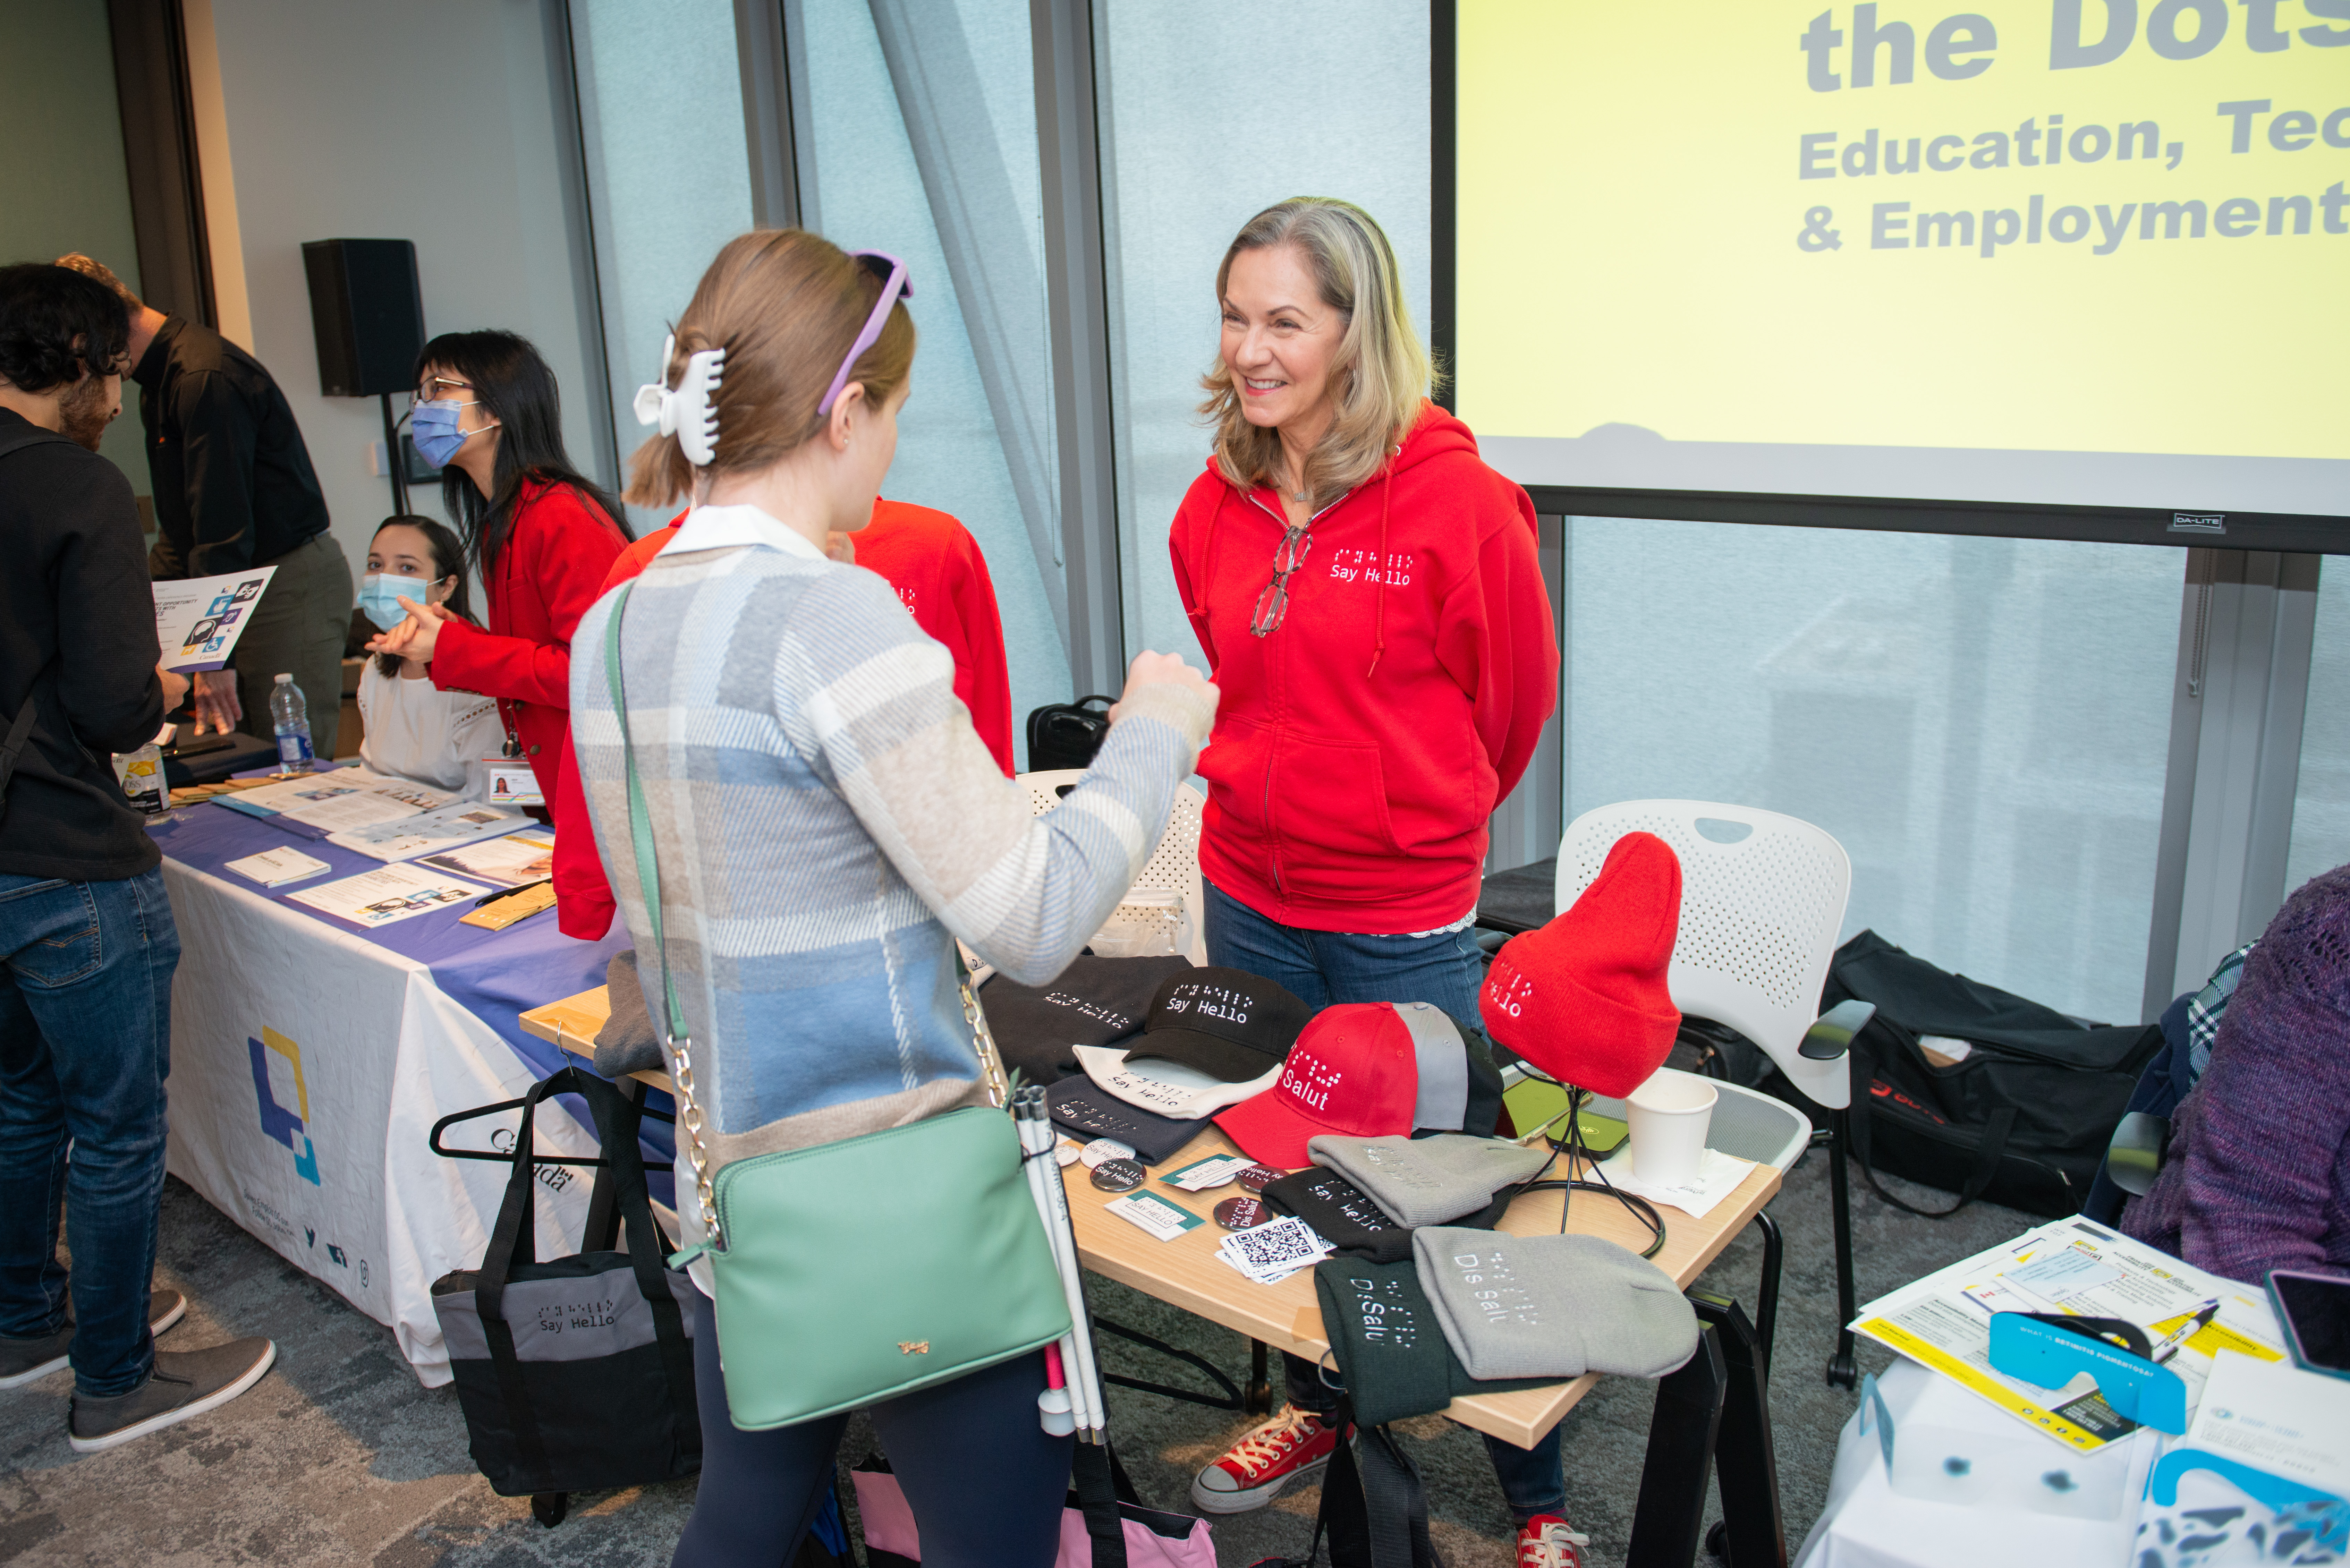 A woman wearing a red sweater stands at a booth selling shirts and hats at the connecting the dots conference in Toronto. Another woman looks at the table and talks with her.